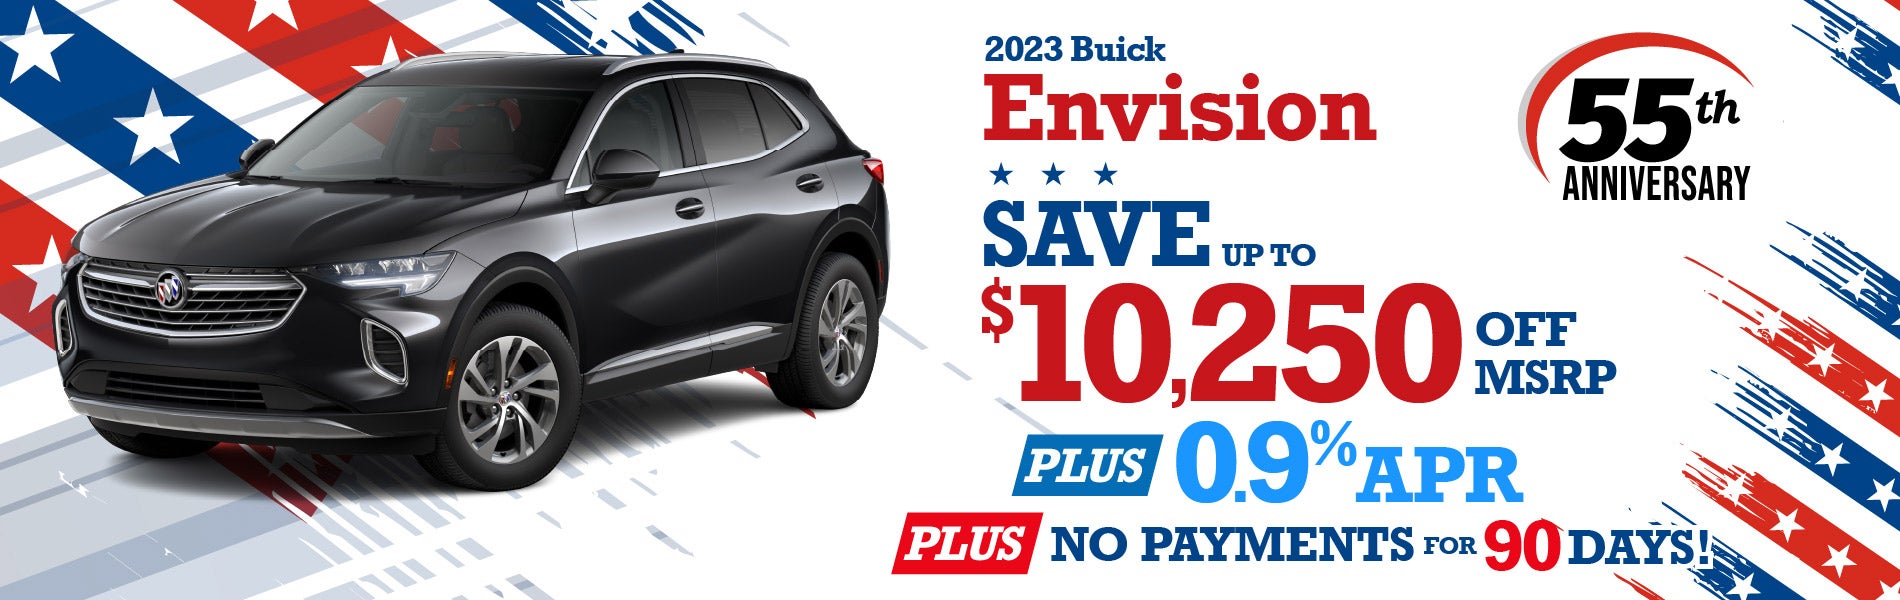 2023 Buick Envision - SAVE up to $10,250 or 0.9% APR